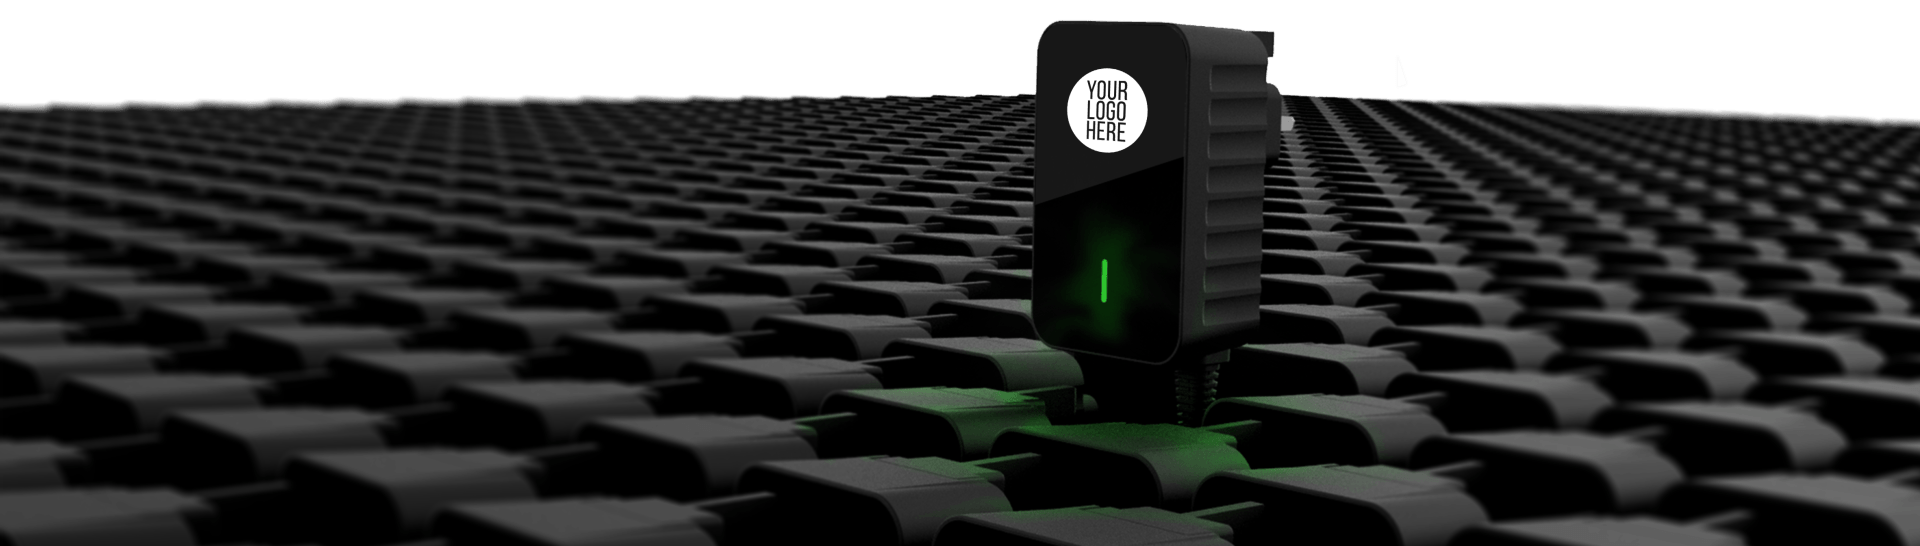 A NEO power supply is sitting in the middle of a field of black blocks.